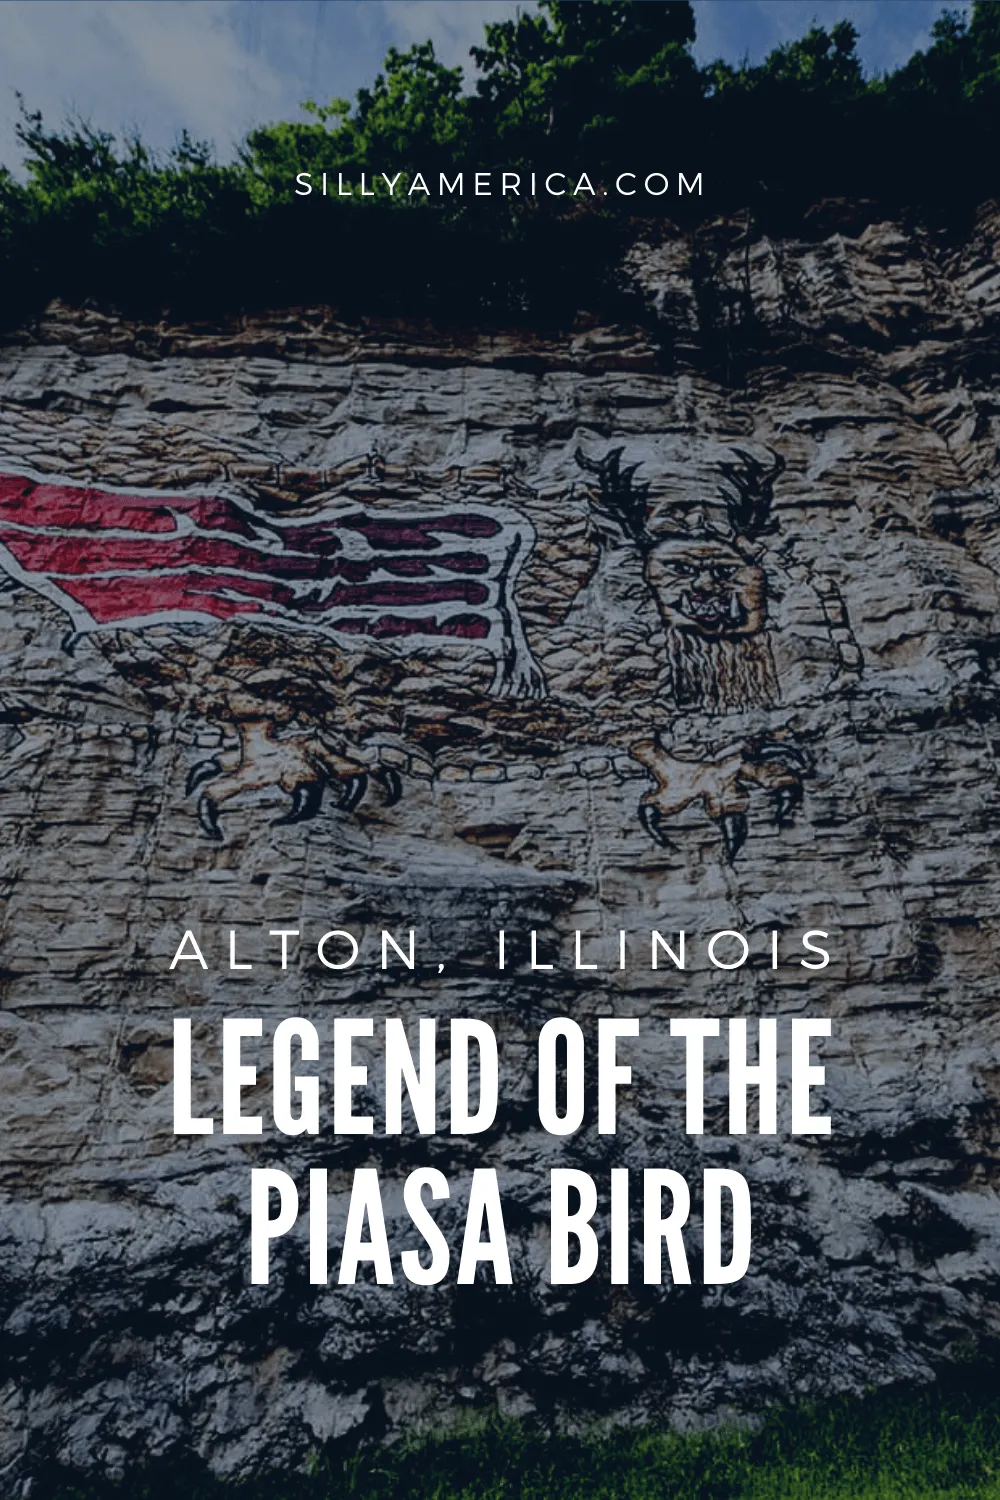 The Legend of the Piasa Bird shows a painting of a mythical beast on a limestone cliff, in Alton, Illinois. Visit this Illinois roadside attraction on a A Great River Road road trip or an Alton vacation. A fun roadside oddity! #IllinoisRoadsideAttractions #IllinoisRoadsideAttraction #RoadsideAttractions #RoadsideAttraction #RoadTrip #IllinoisRoadTrip #IllinoisWeekendGetaways #IllinoisWithKids #Route66 #IllinoisRoute66 #IllinoisRoadTripItinerary #IllinoisRoadTripMap #IllinoisRoadTripTravel